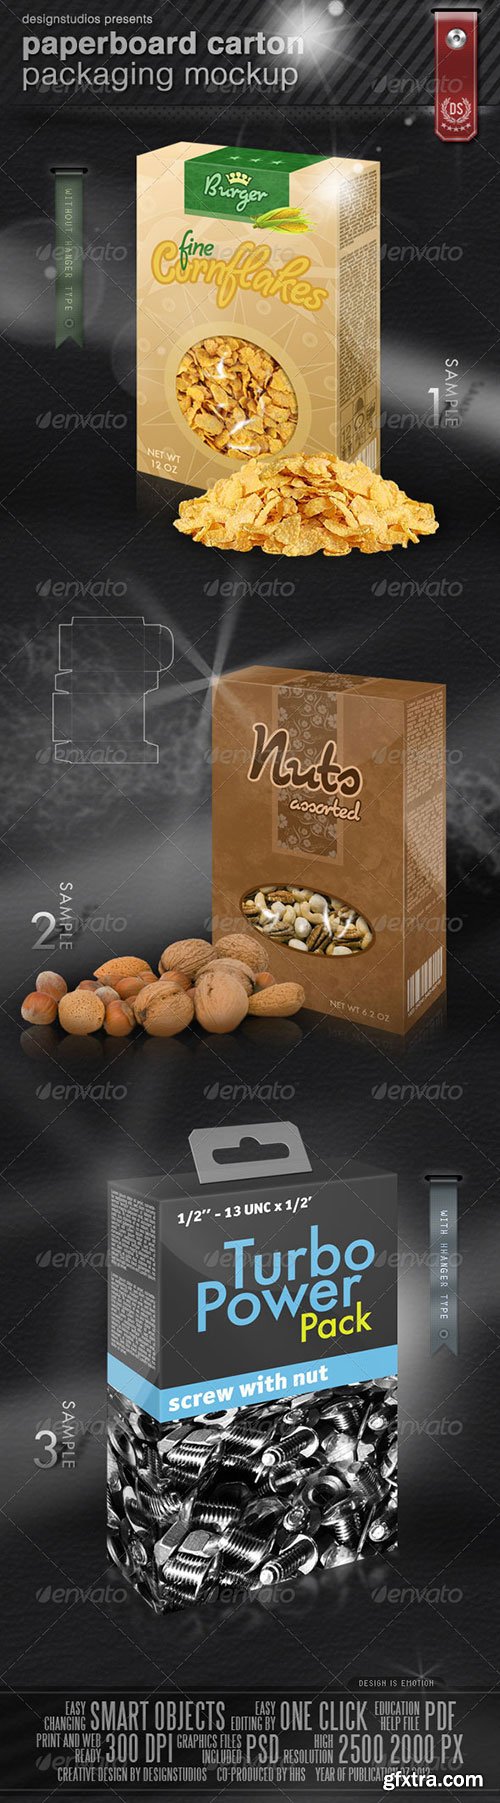 GraphicRiver - Paperboard Carton Packaging Mock-Up